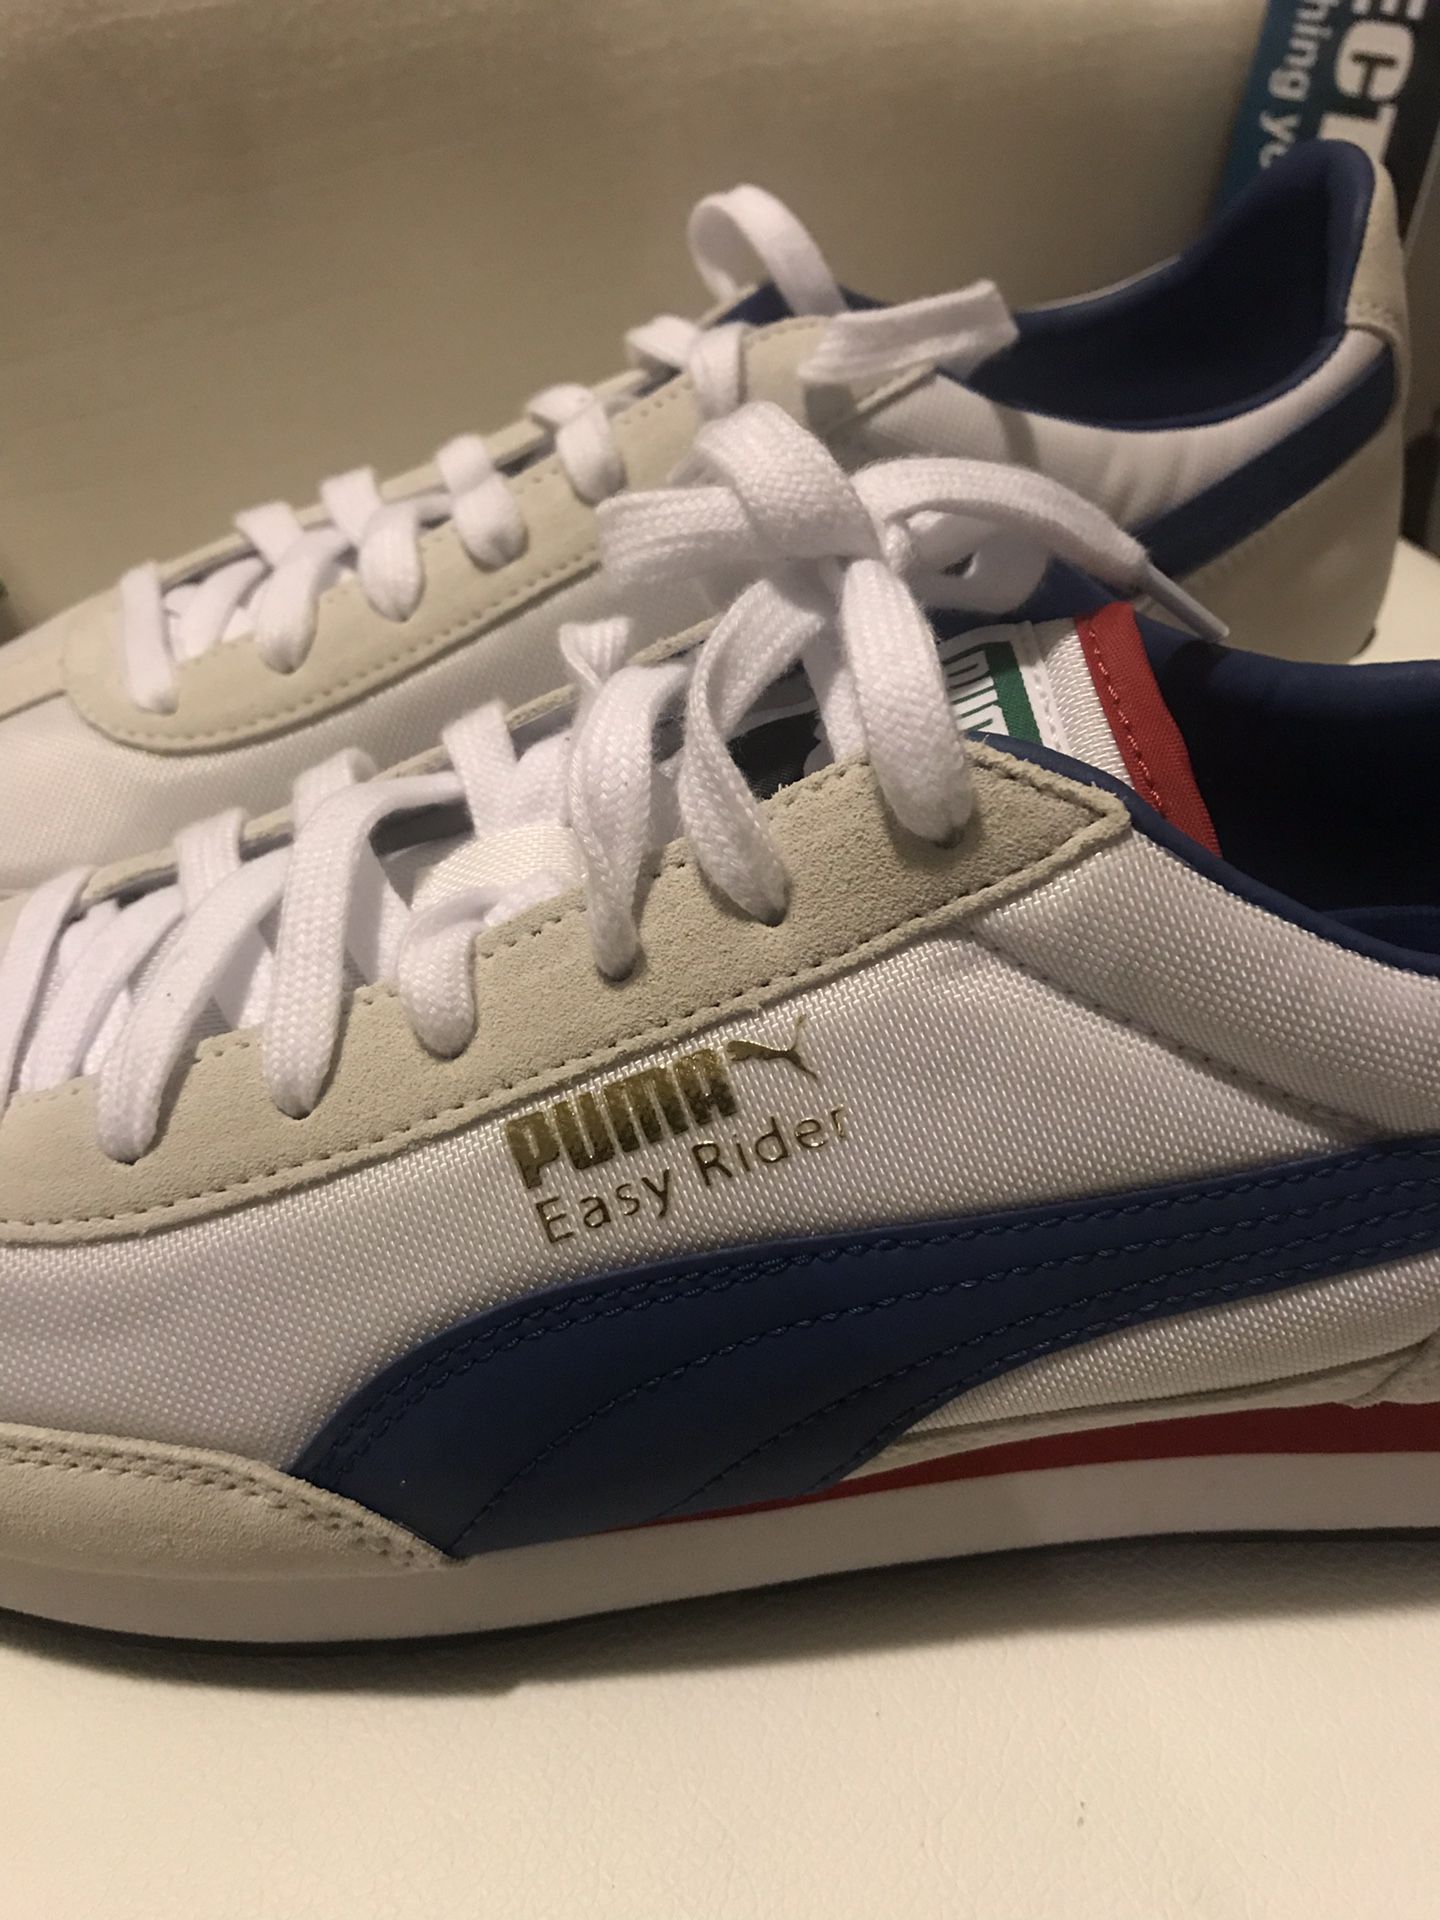 Brand new puma easy rider size 11 for Sale in Egg Harbor Township, NJ ...